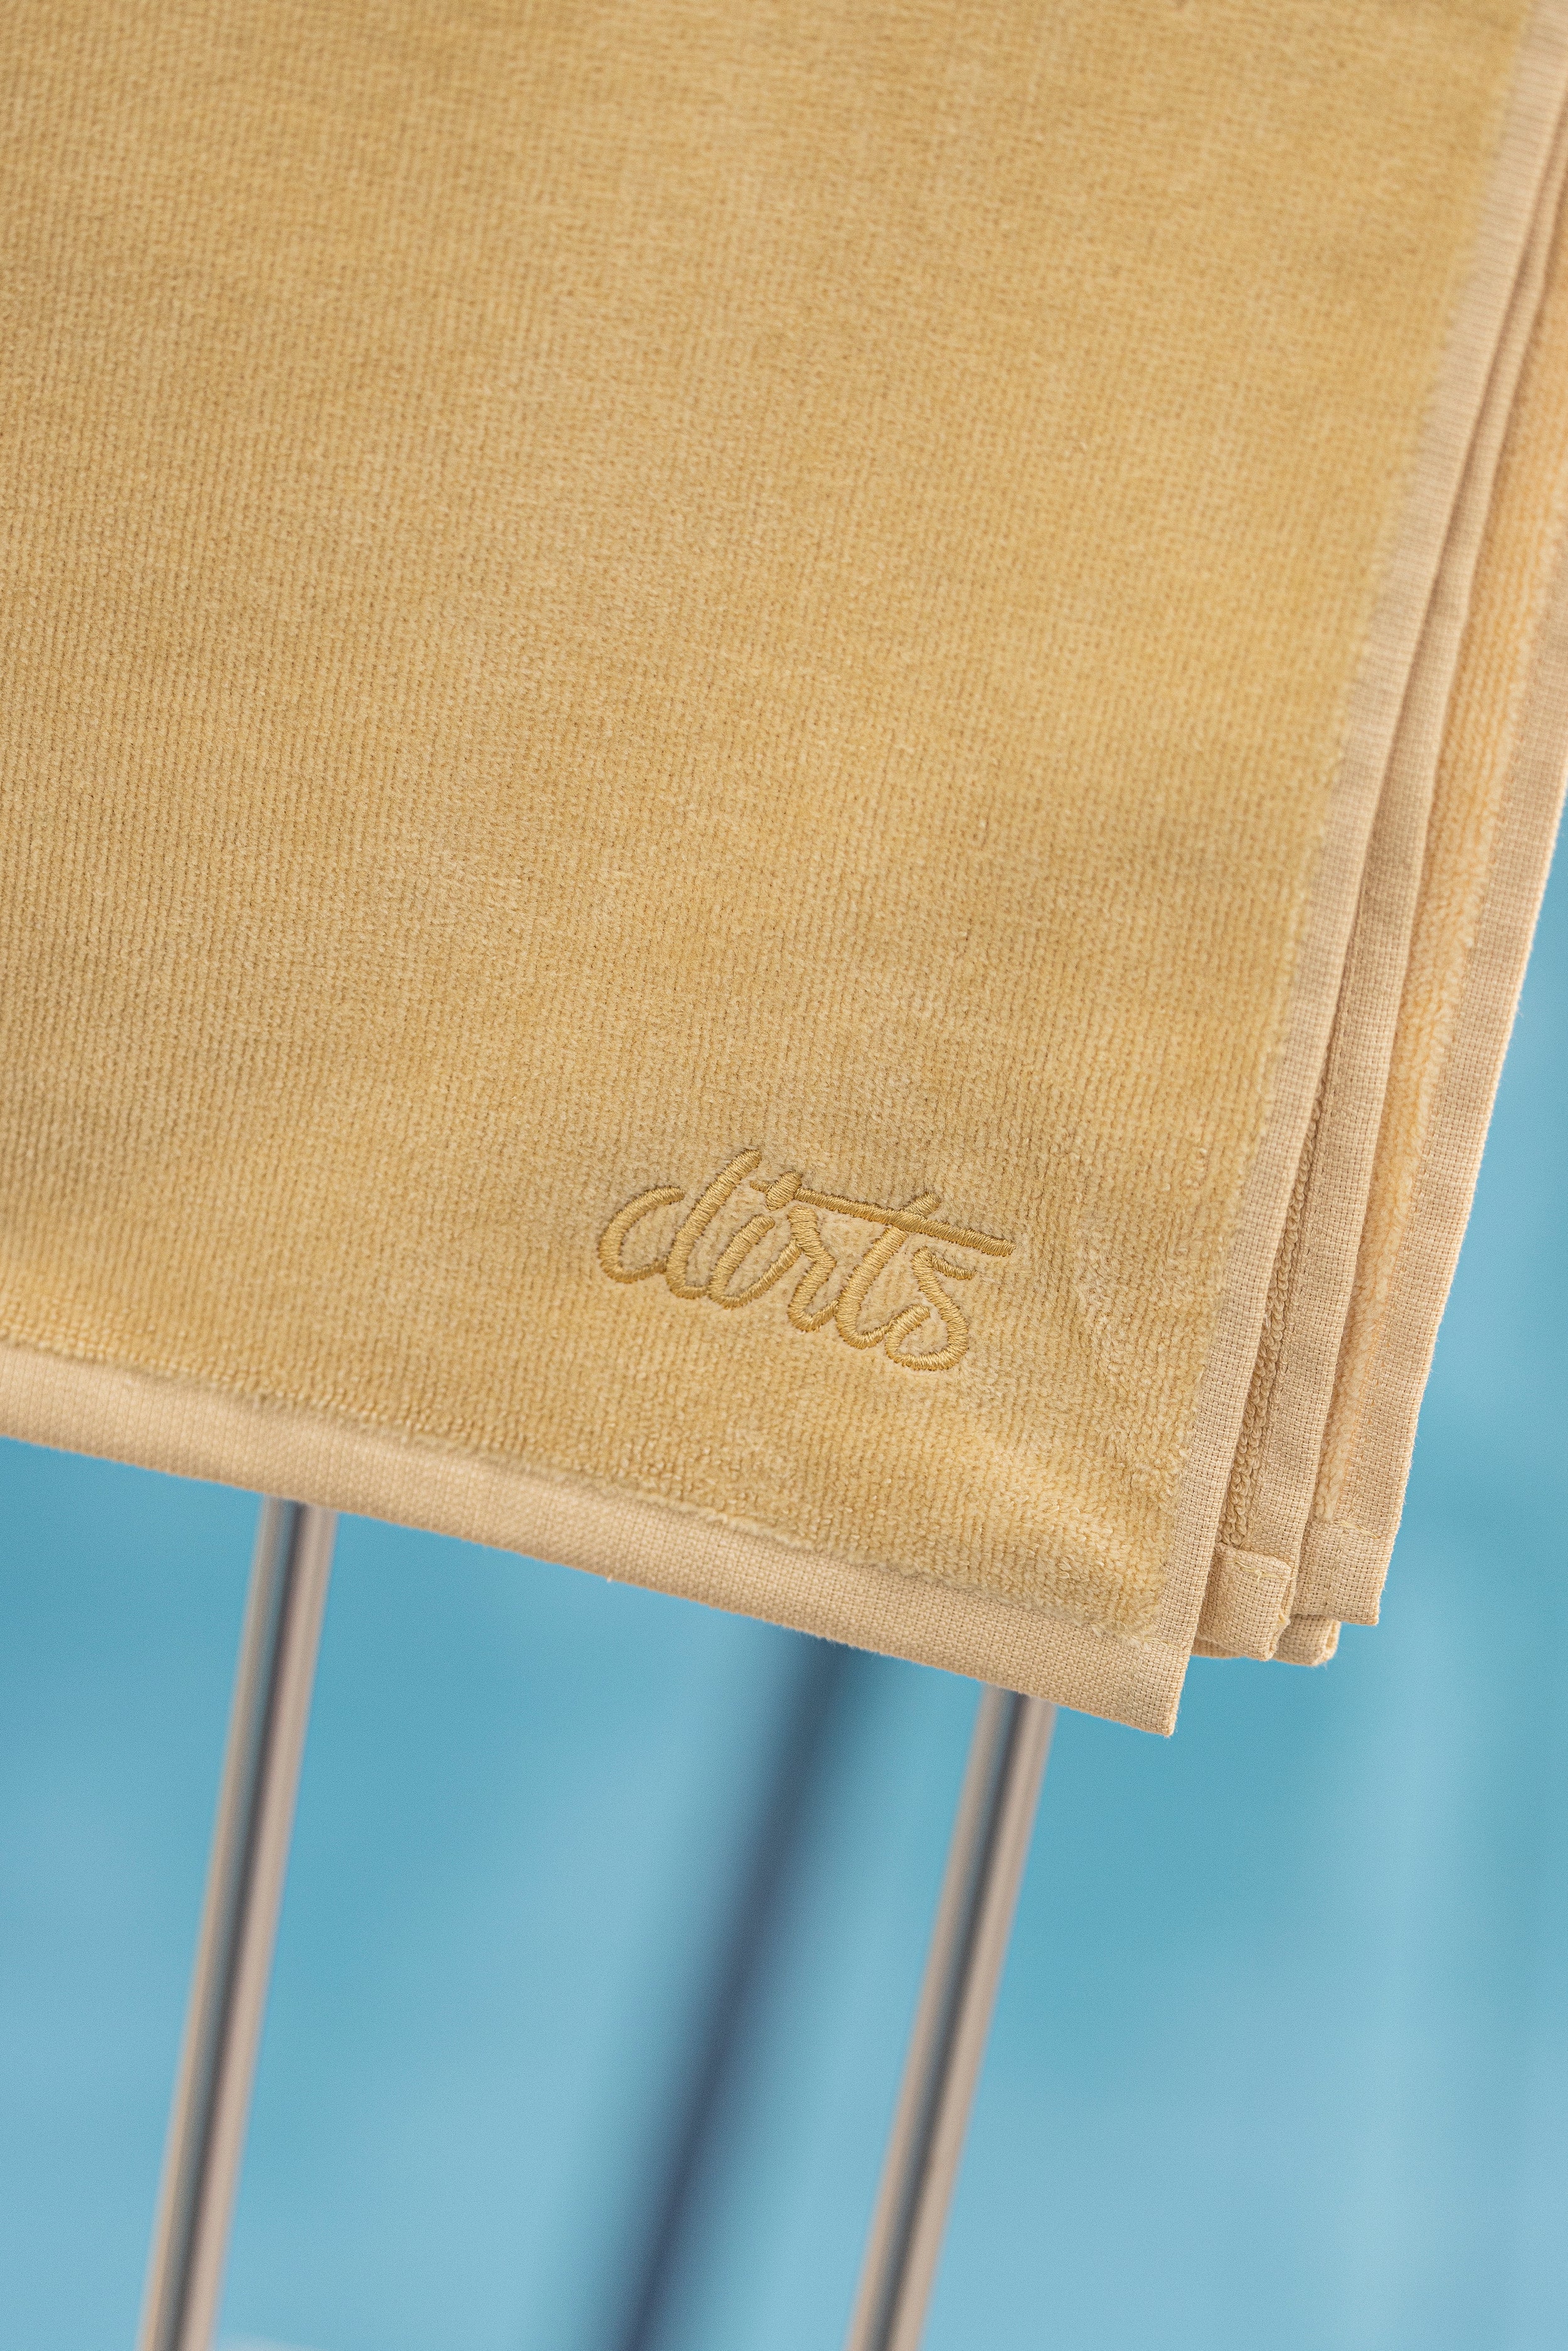 Bath towel "The Towel" by Dirts made of organic cotton